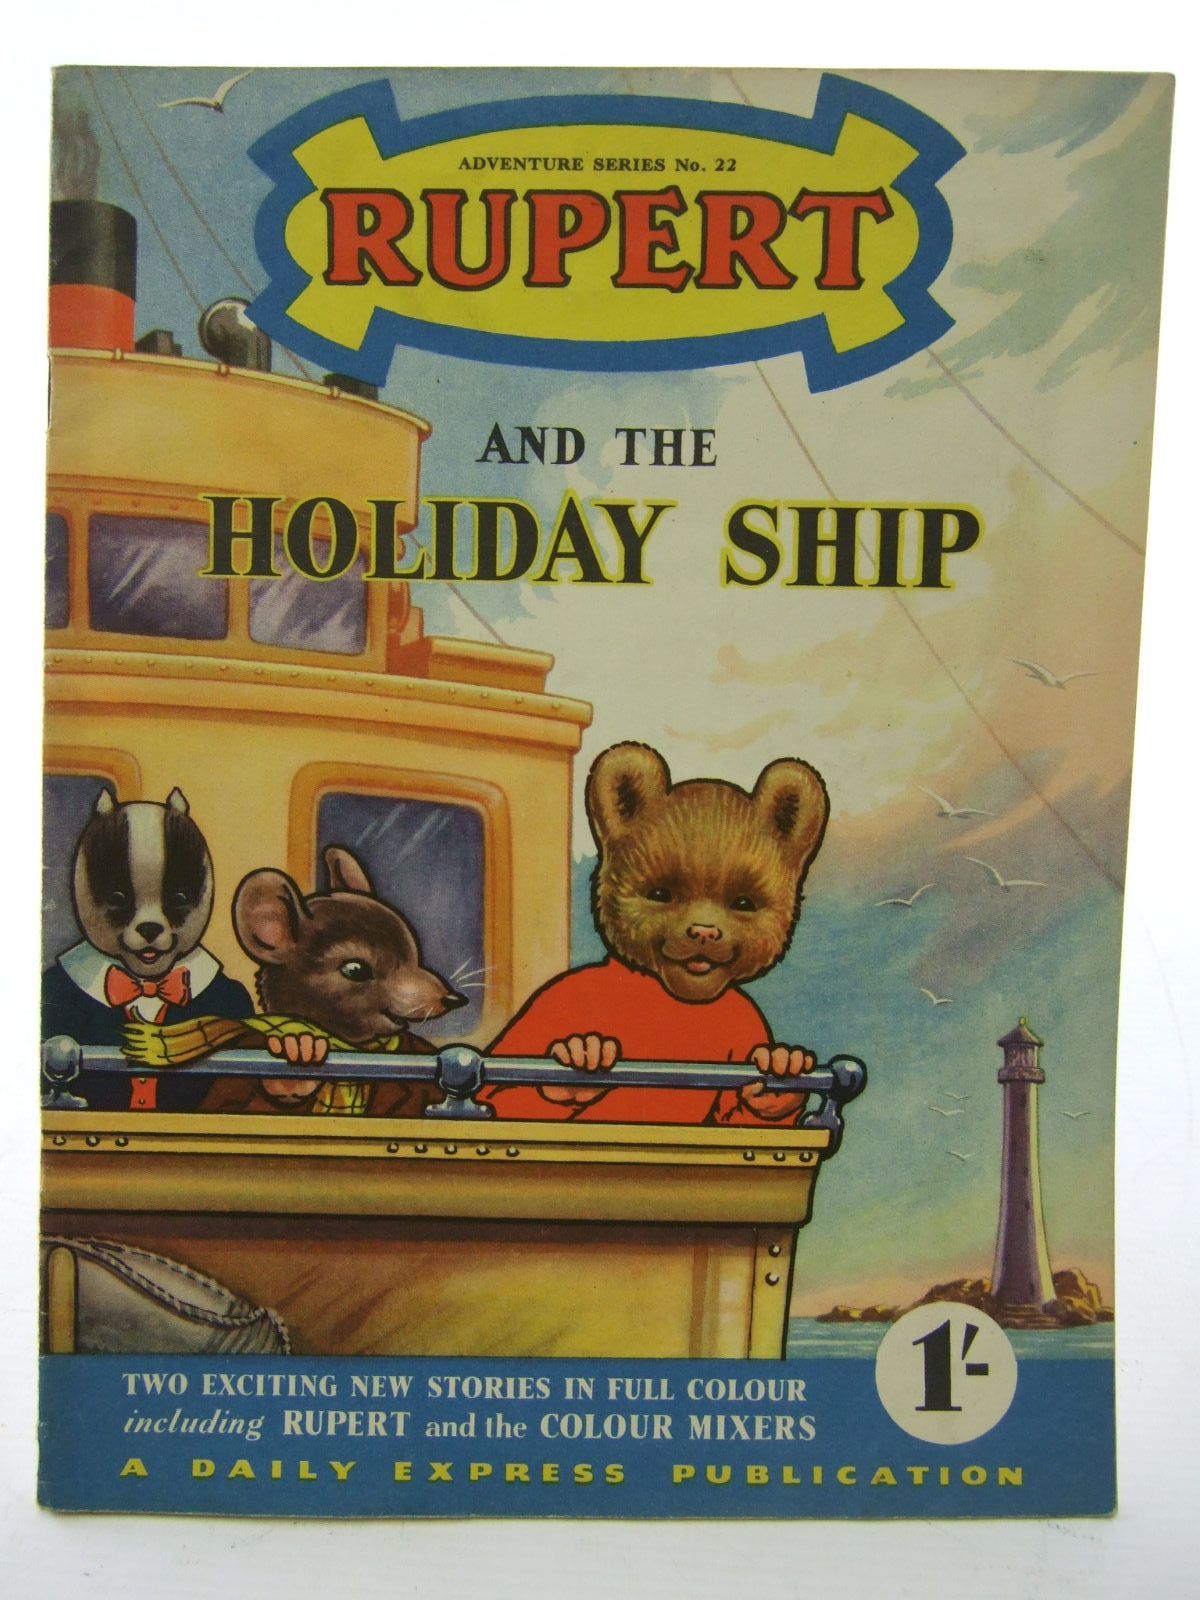 Photo of RUPERT ADVENTURE SERIES No. 22 - RUPERT AND THE HOLIDAY SHIP written by Bestall, Alfred published by Daily Express (STOCK CODE: 1706112)  for sale by Stella & Rose's Books